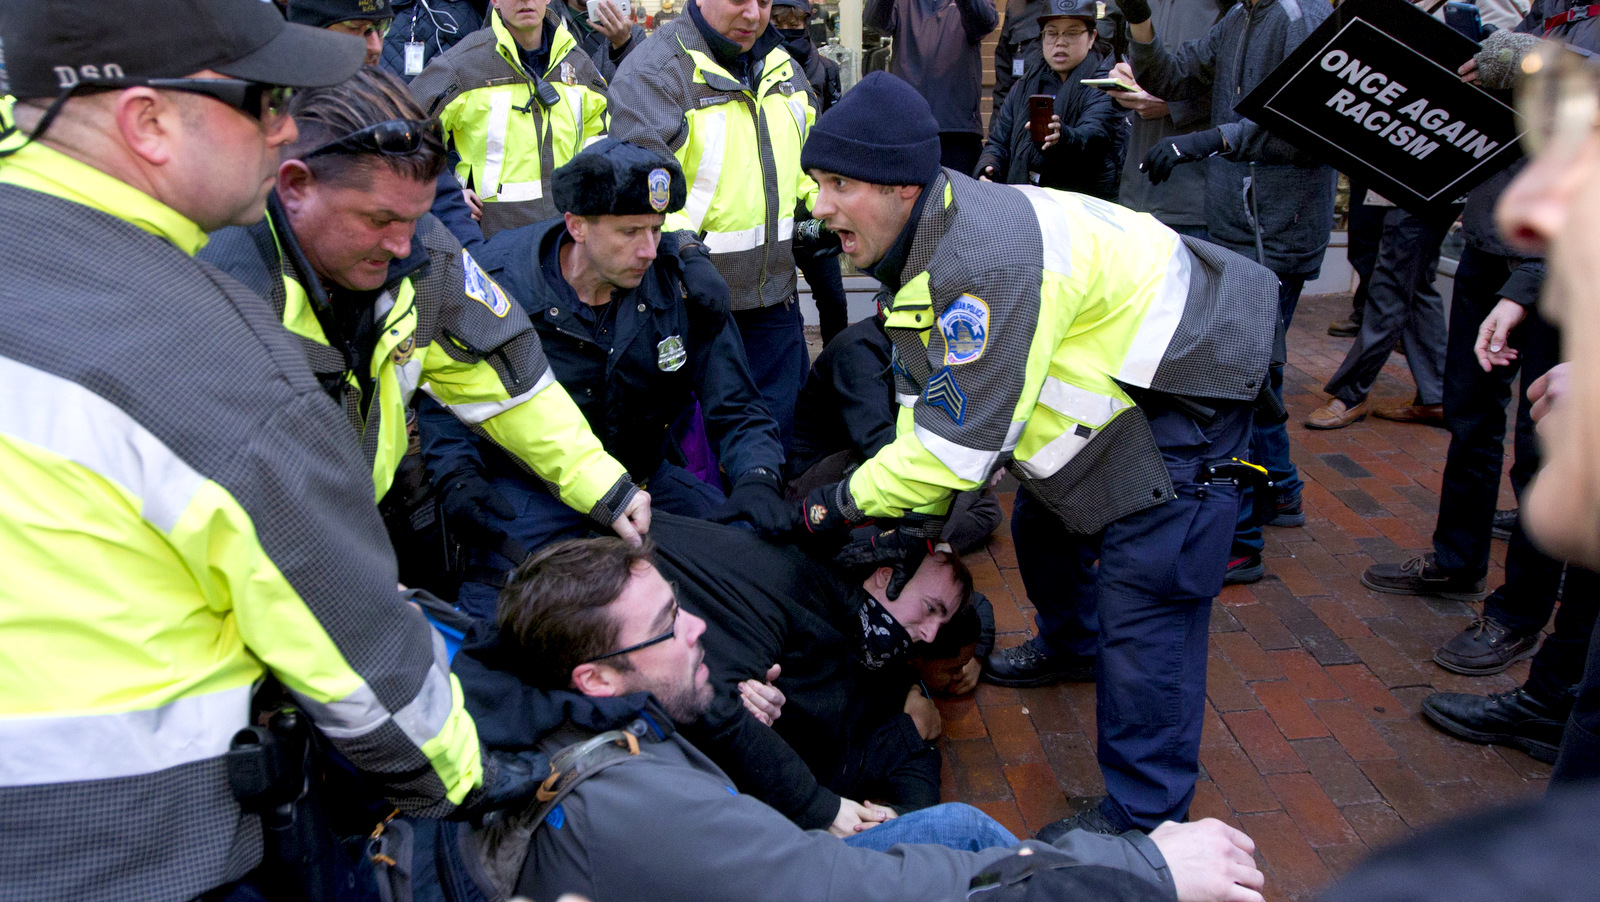 Police try to remove demonstrators from attempting to block people entering a security checkpoint, Friday, Jan. 20, 2017, ahead of President-elect Donald Trump's inauguration in Washington. ( AP/Jose Luis Magana)